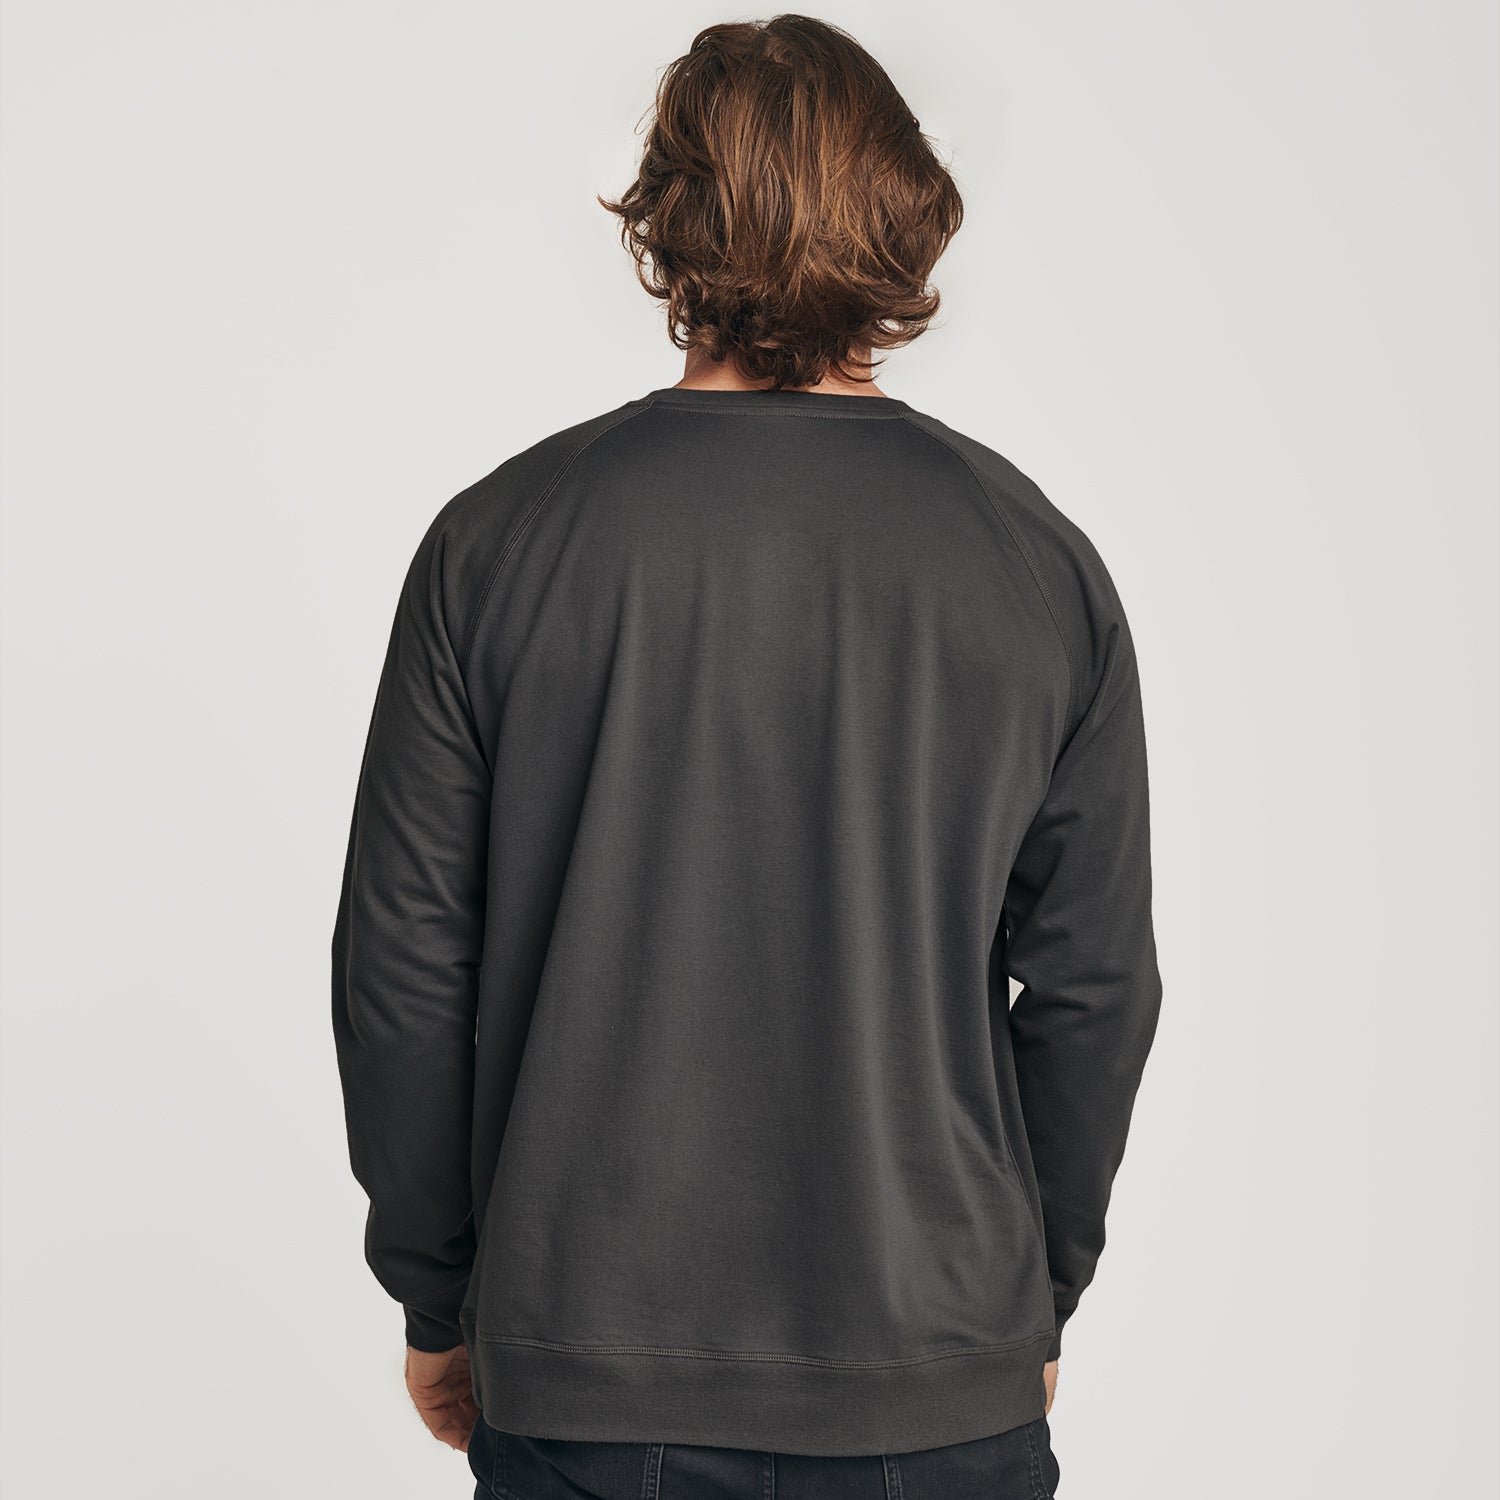 Carbon French Terry Sweatshirt